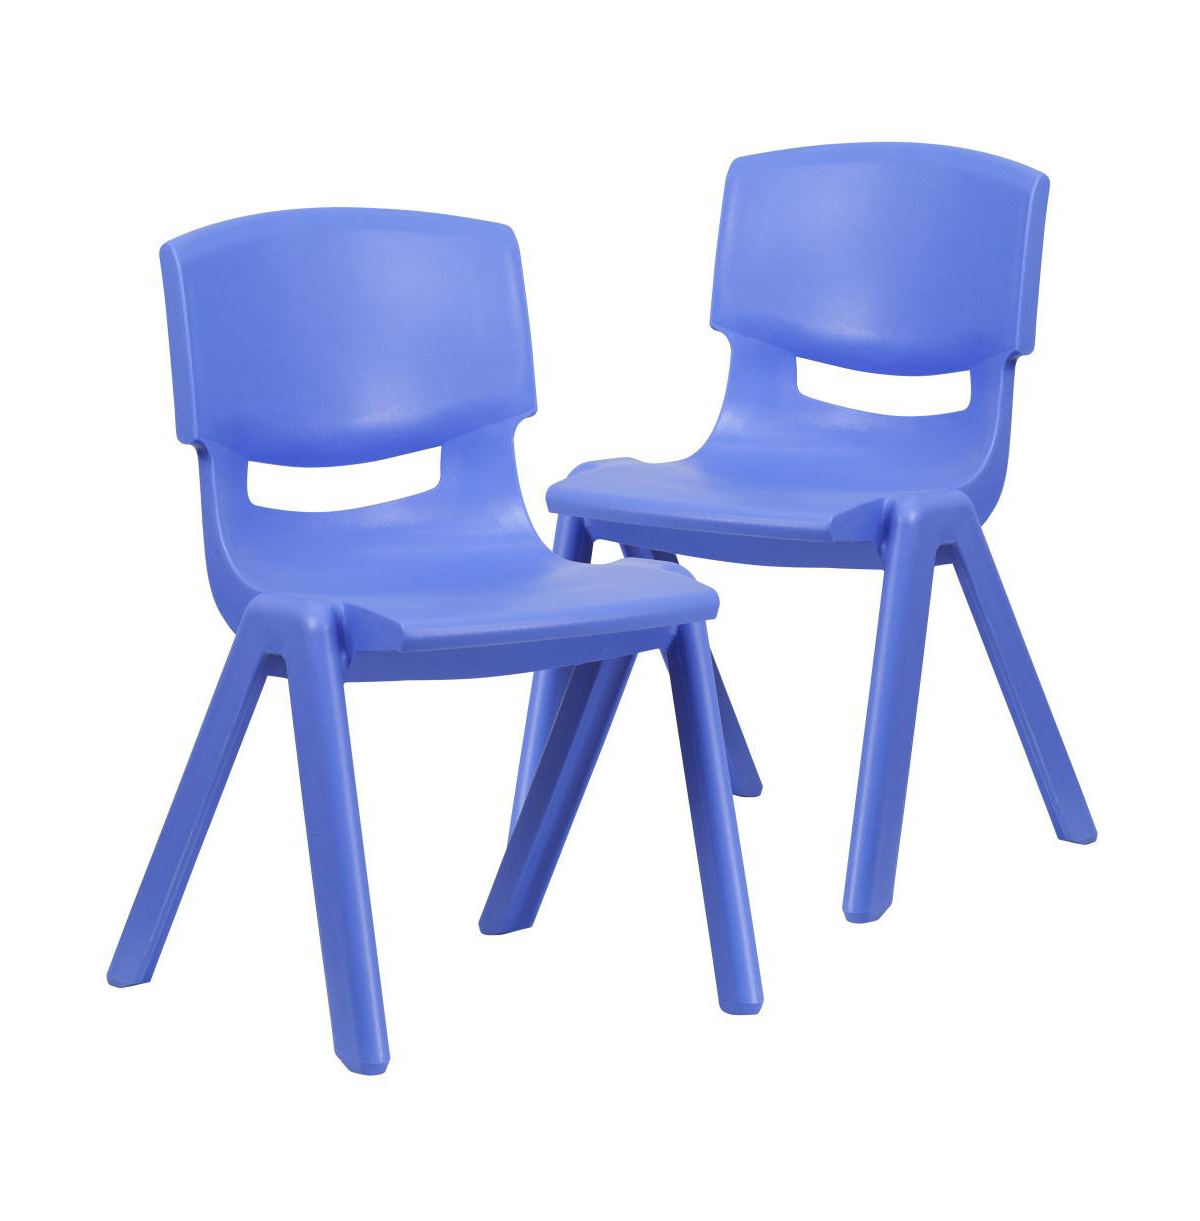 Emma+oliver 2 Pack Plastic Stackable School Chair In Blue